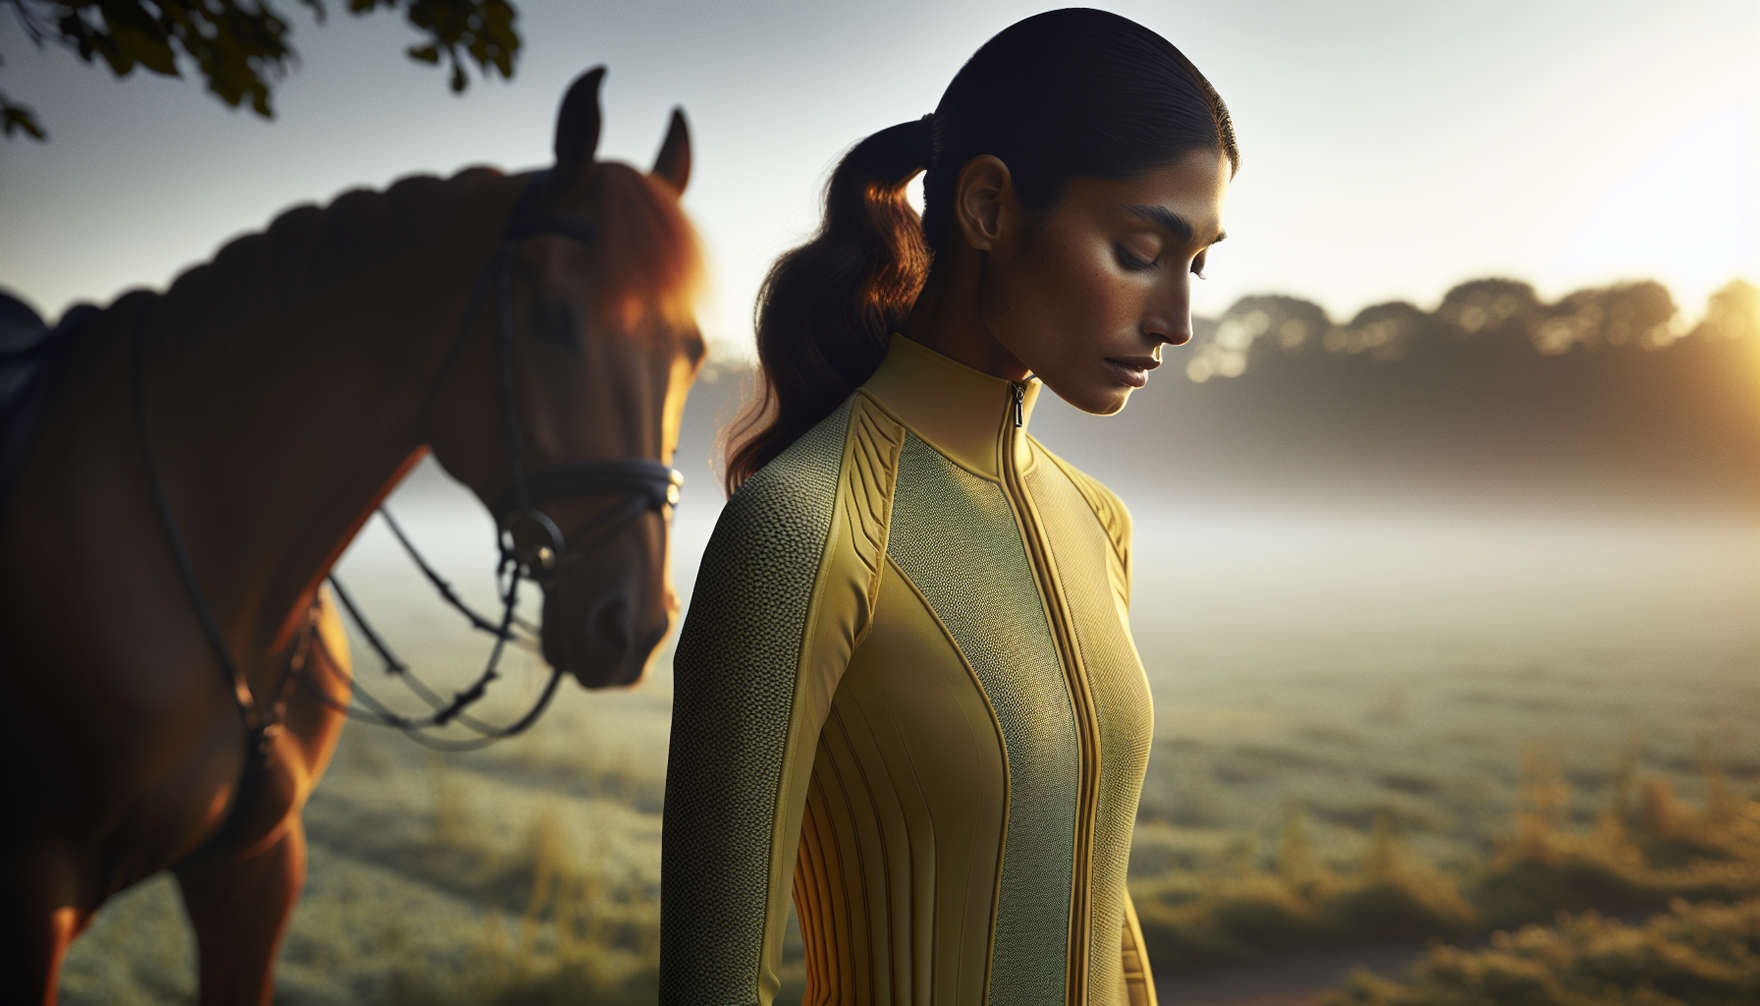 Imagine a tranquil setting at the break of dawn where a South Asian female equestrian can be seen preparing for her morning horse ride. She wears a lightweight, breathable equestrian jacket, designed 